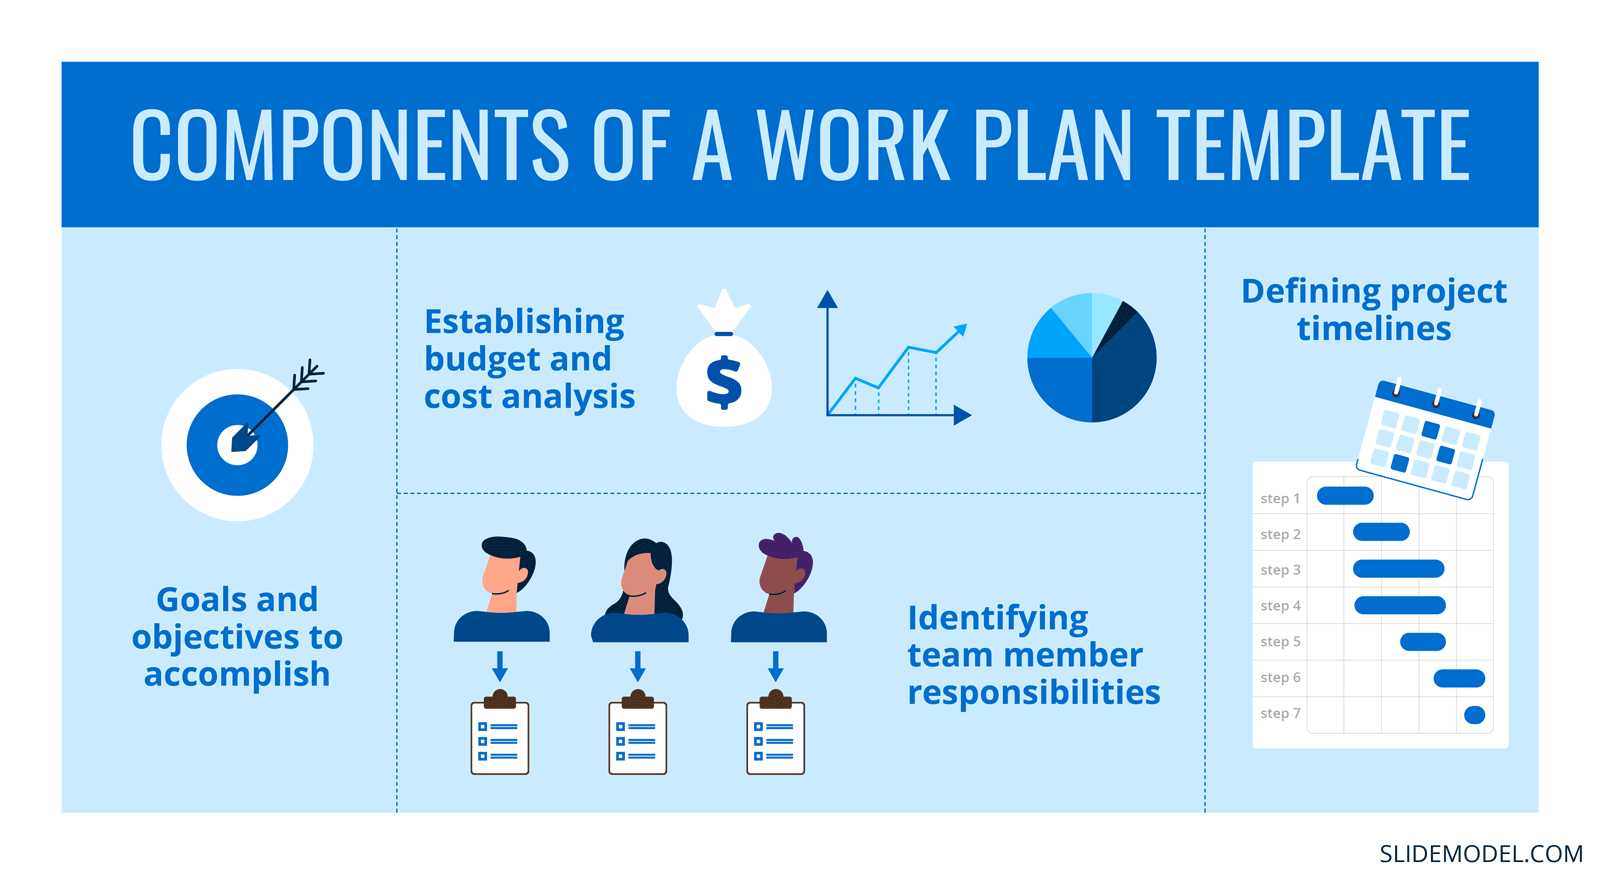 Components of a Work Plan Template